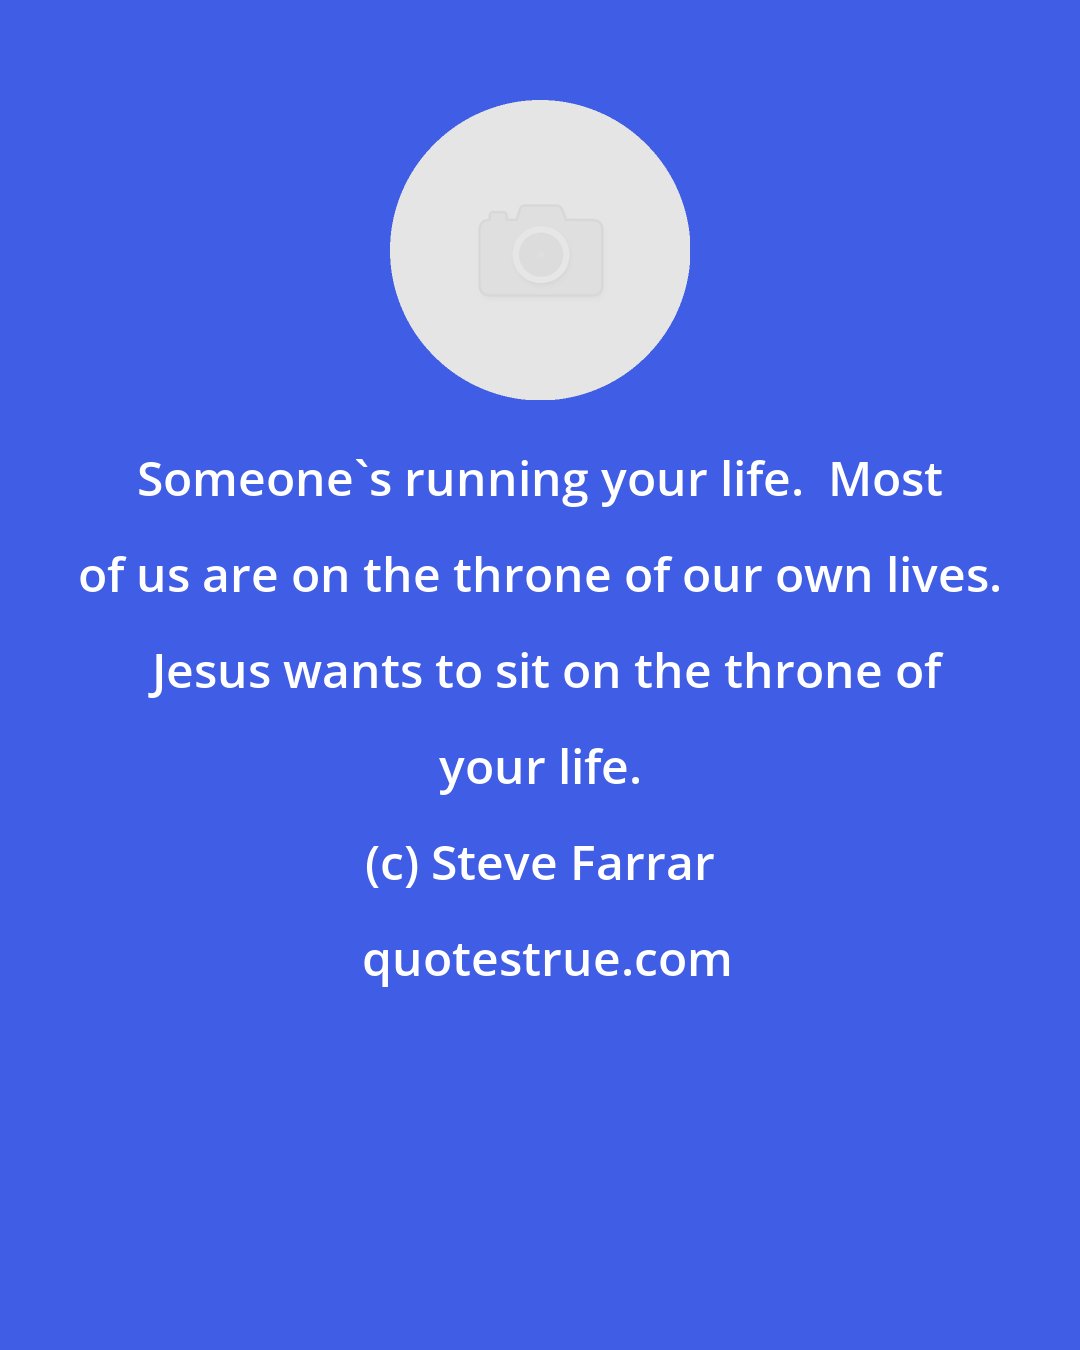 Steve Farrar: Someone's running your life.  Most of us are on the throne of our own lives.  Jesus wants to sit on the throne of your life.